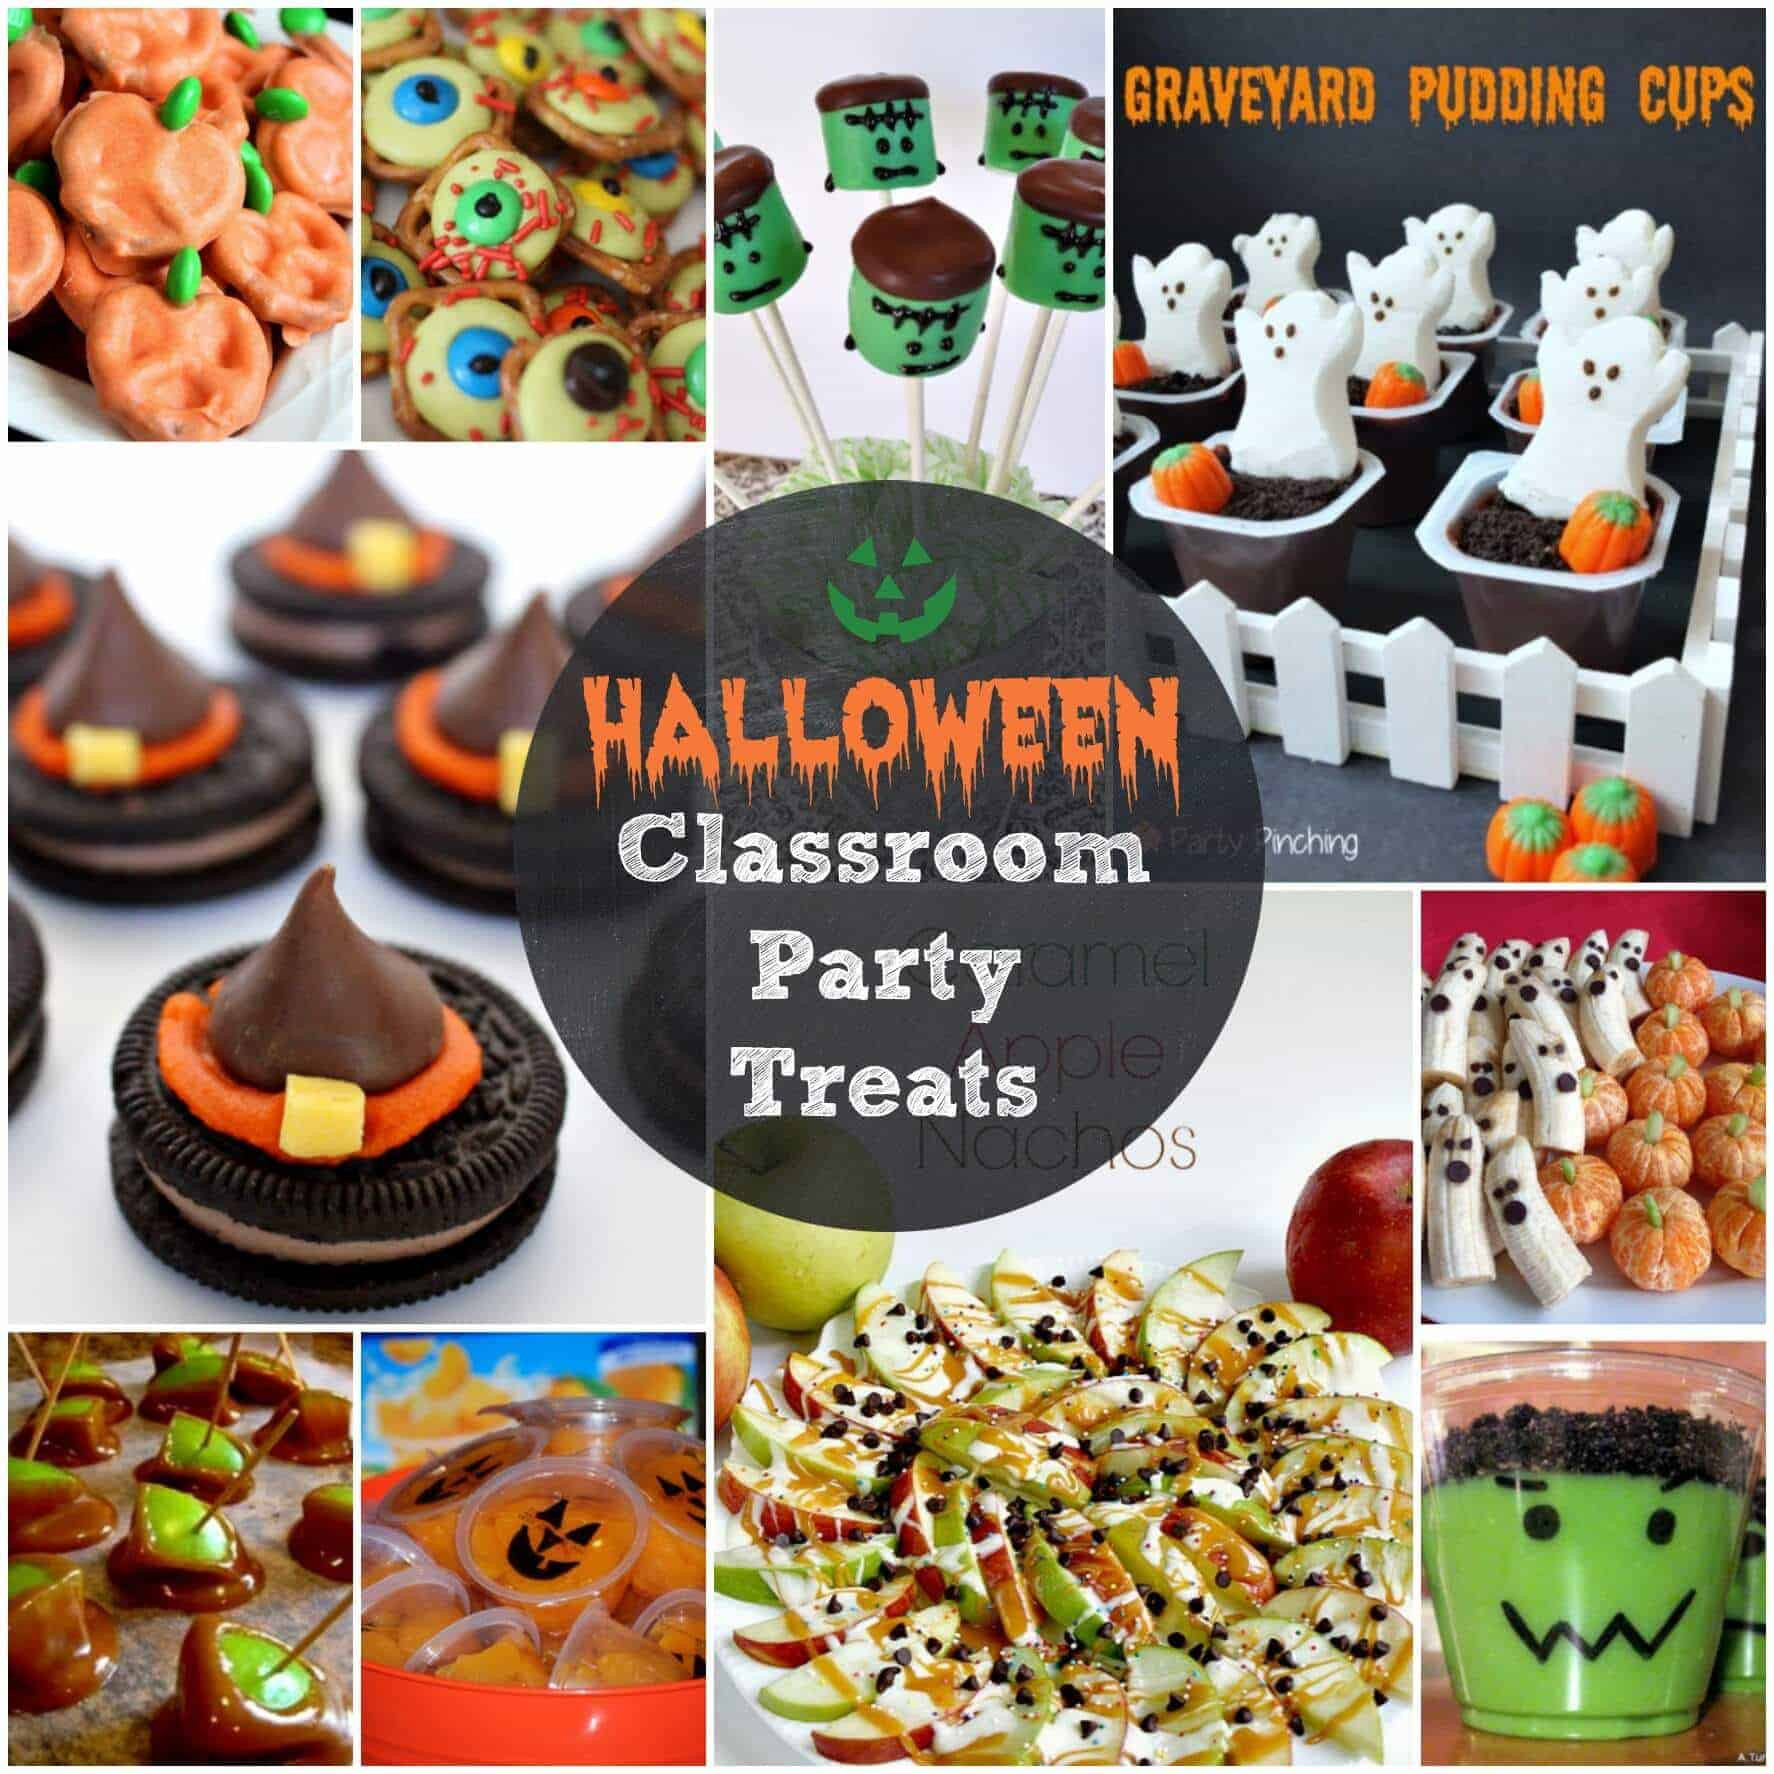 Halloween Classroom Party Ideas
 Fun Halloween Ideas for Kids Page 2 of 2 Princess